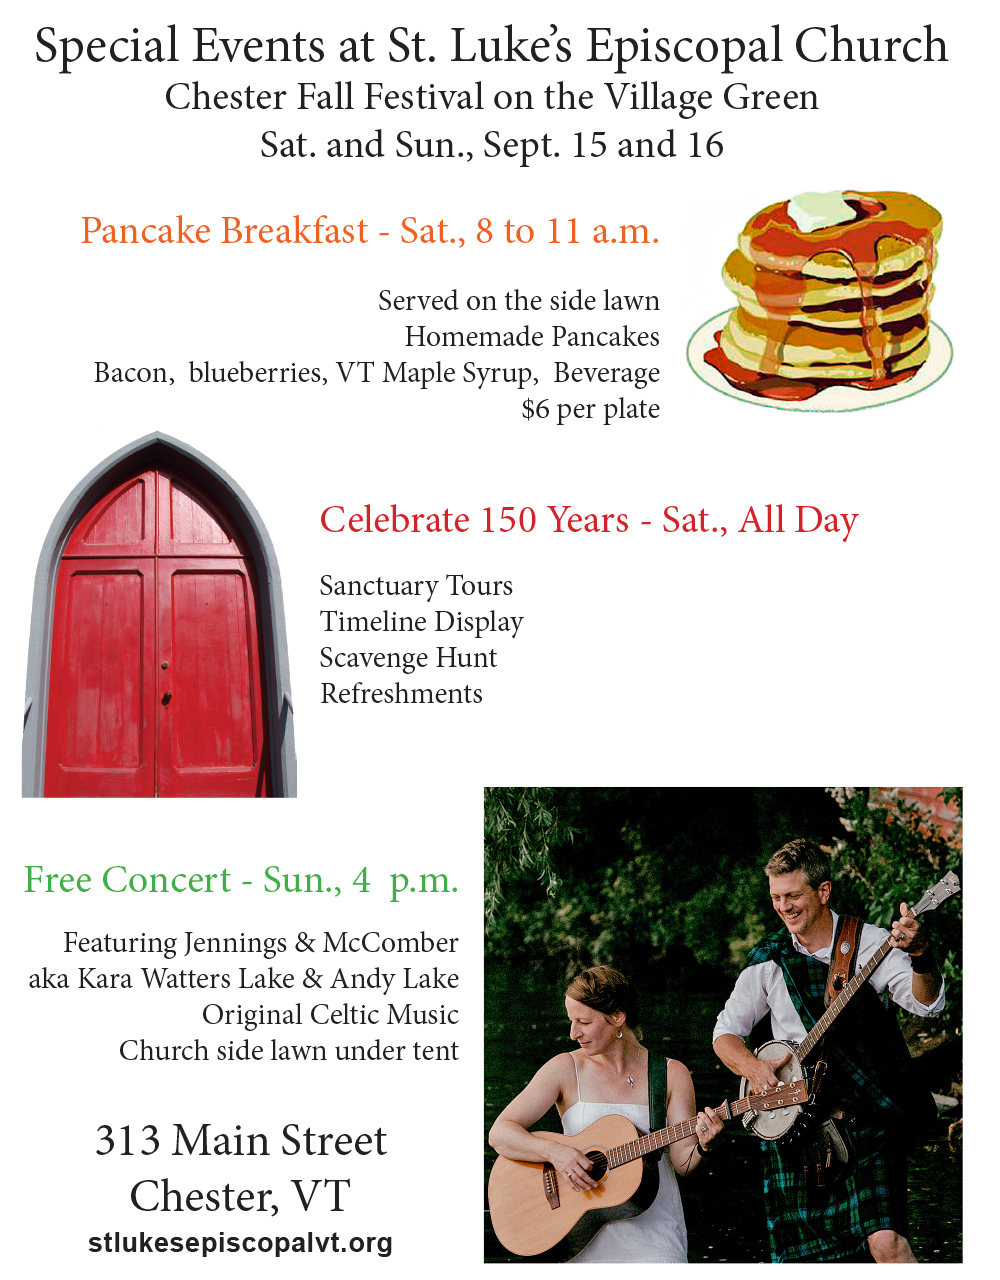 Special Events at St. Luke's Episcopal Church: Chester Fall Festival on the Village Green